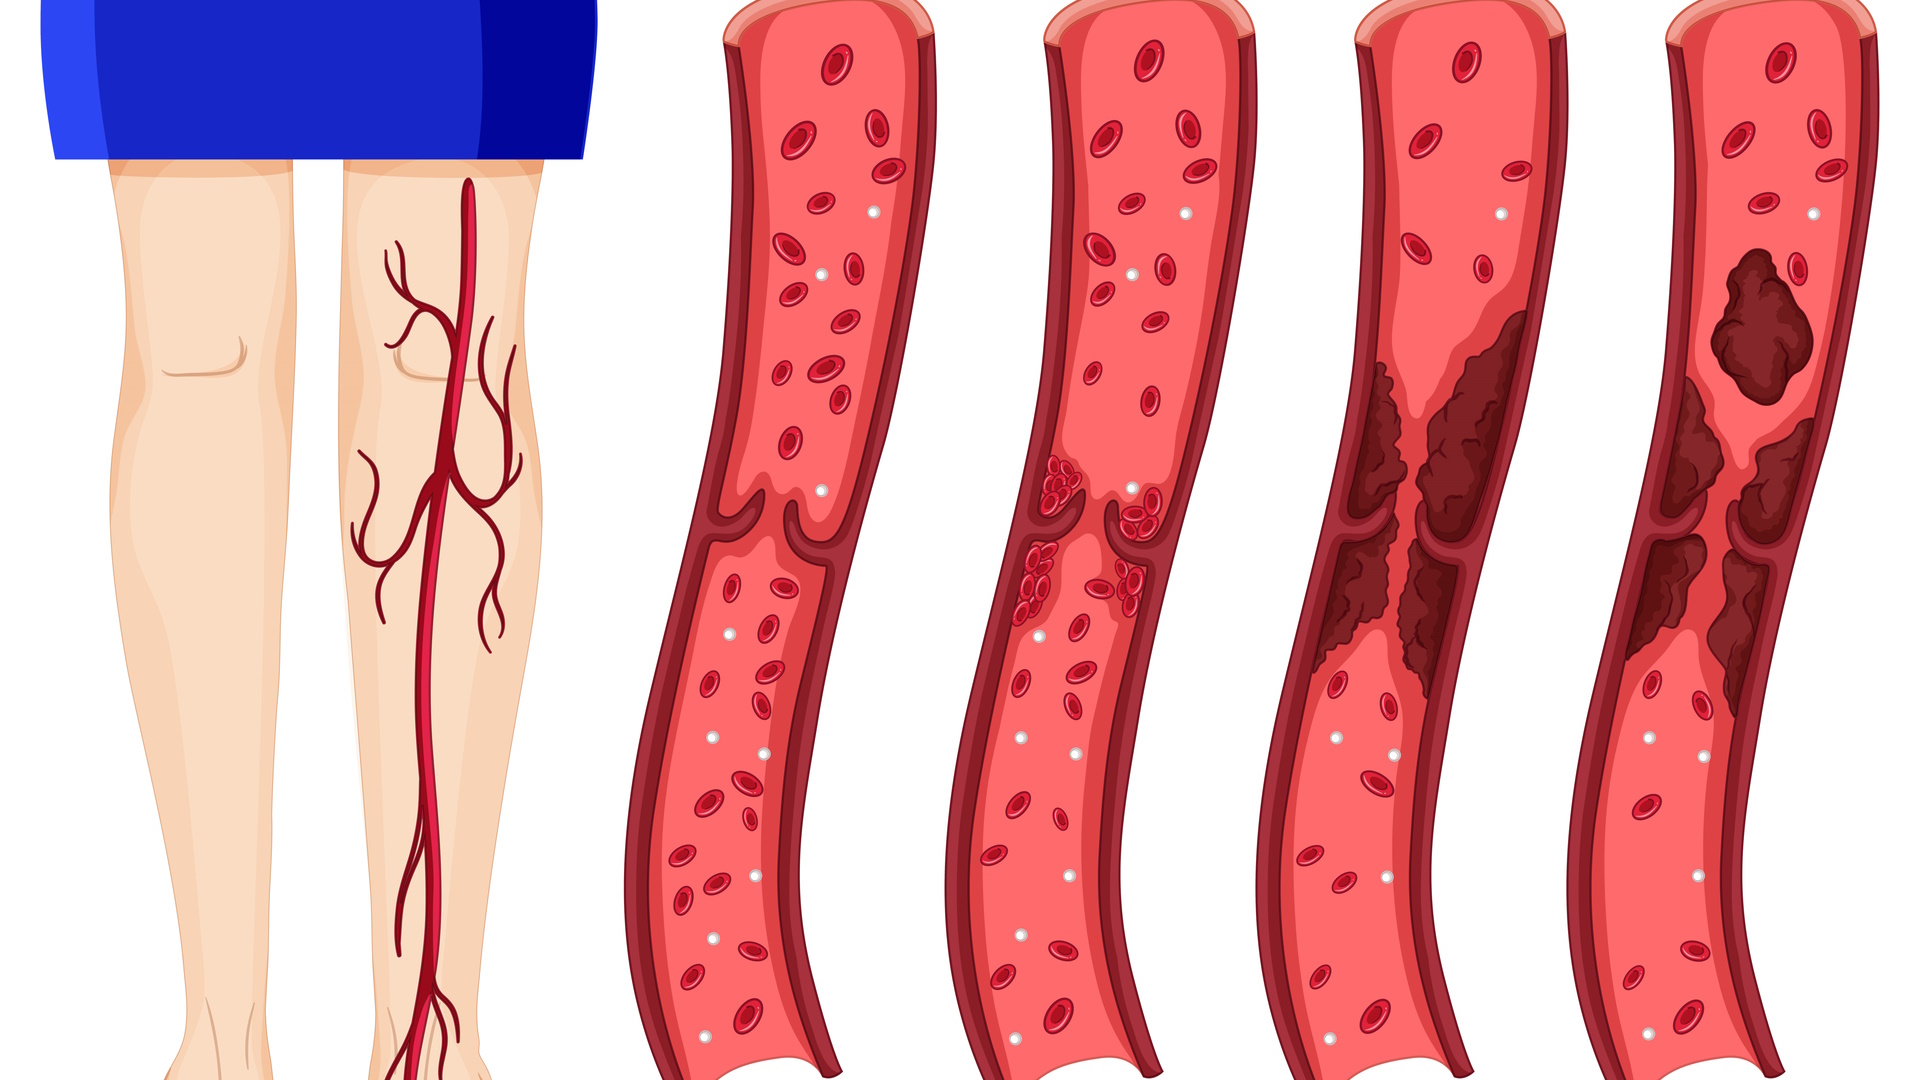 Superficial Vein Thrombosis  Complications of Varicose Veins